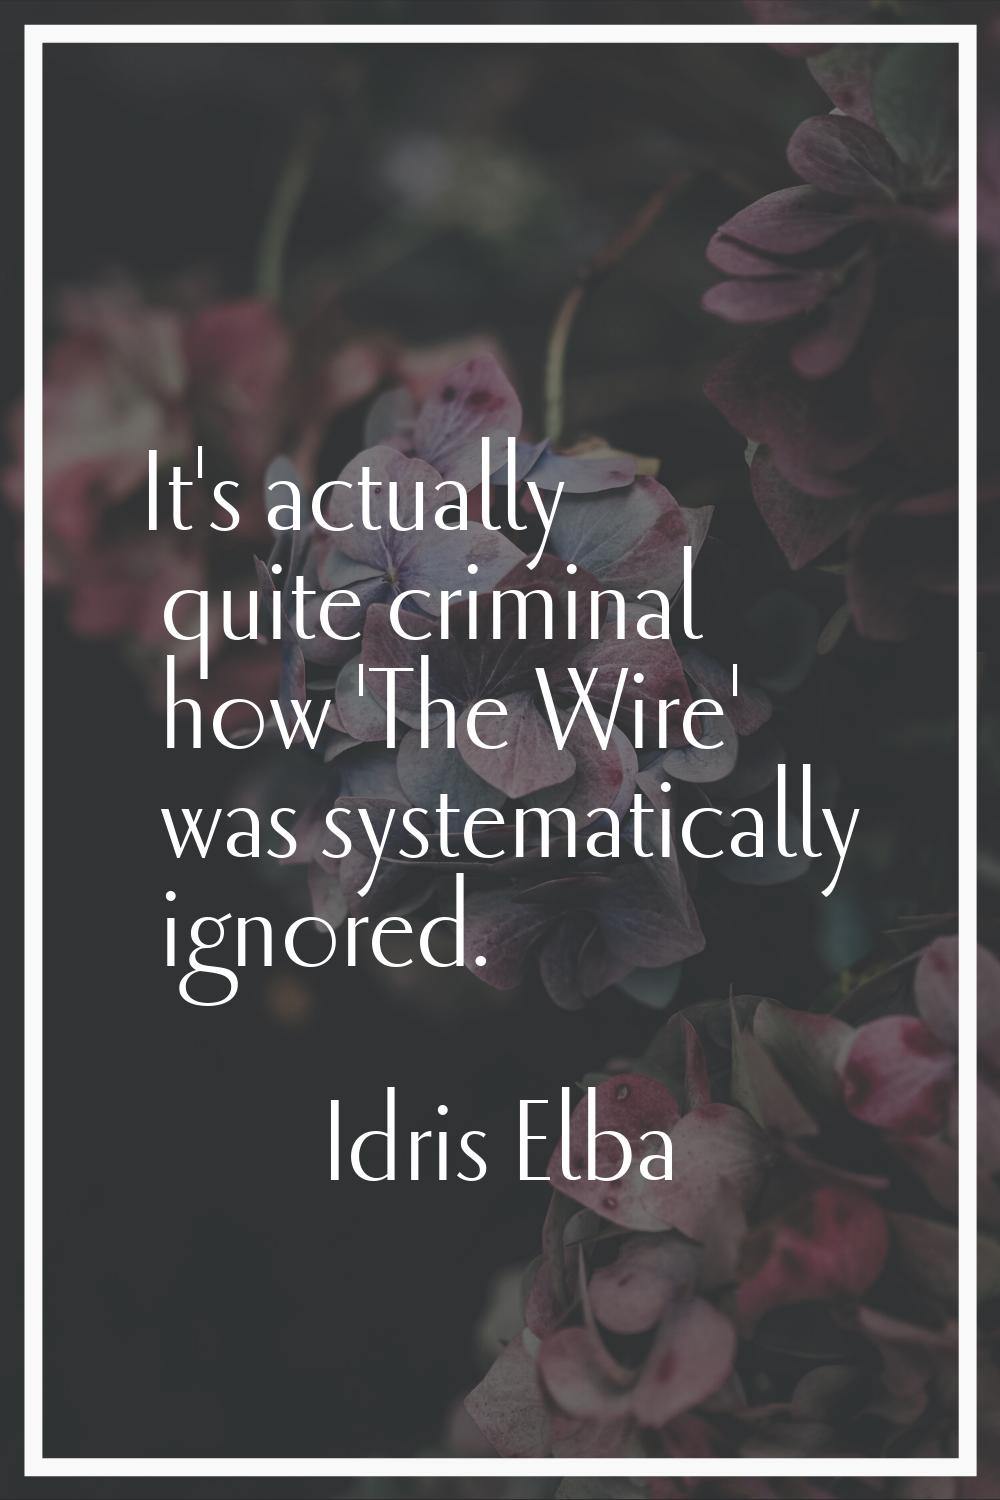 It's actually quite criminal how 'The Wire' was systematically ignored.